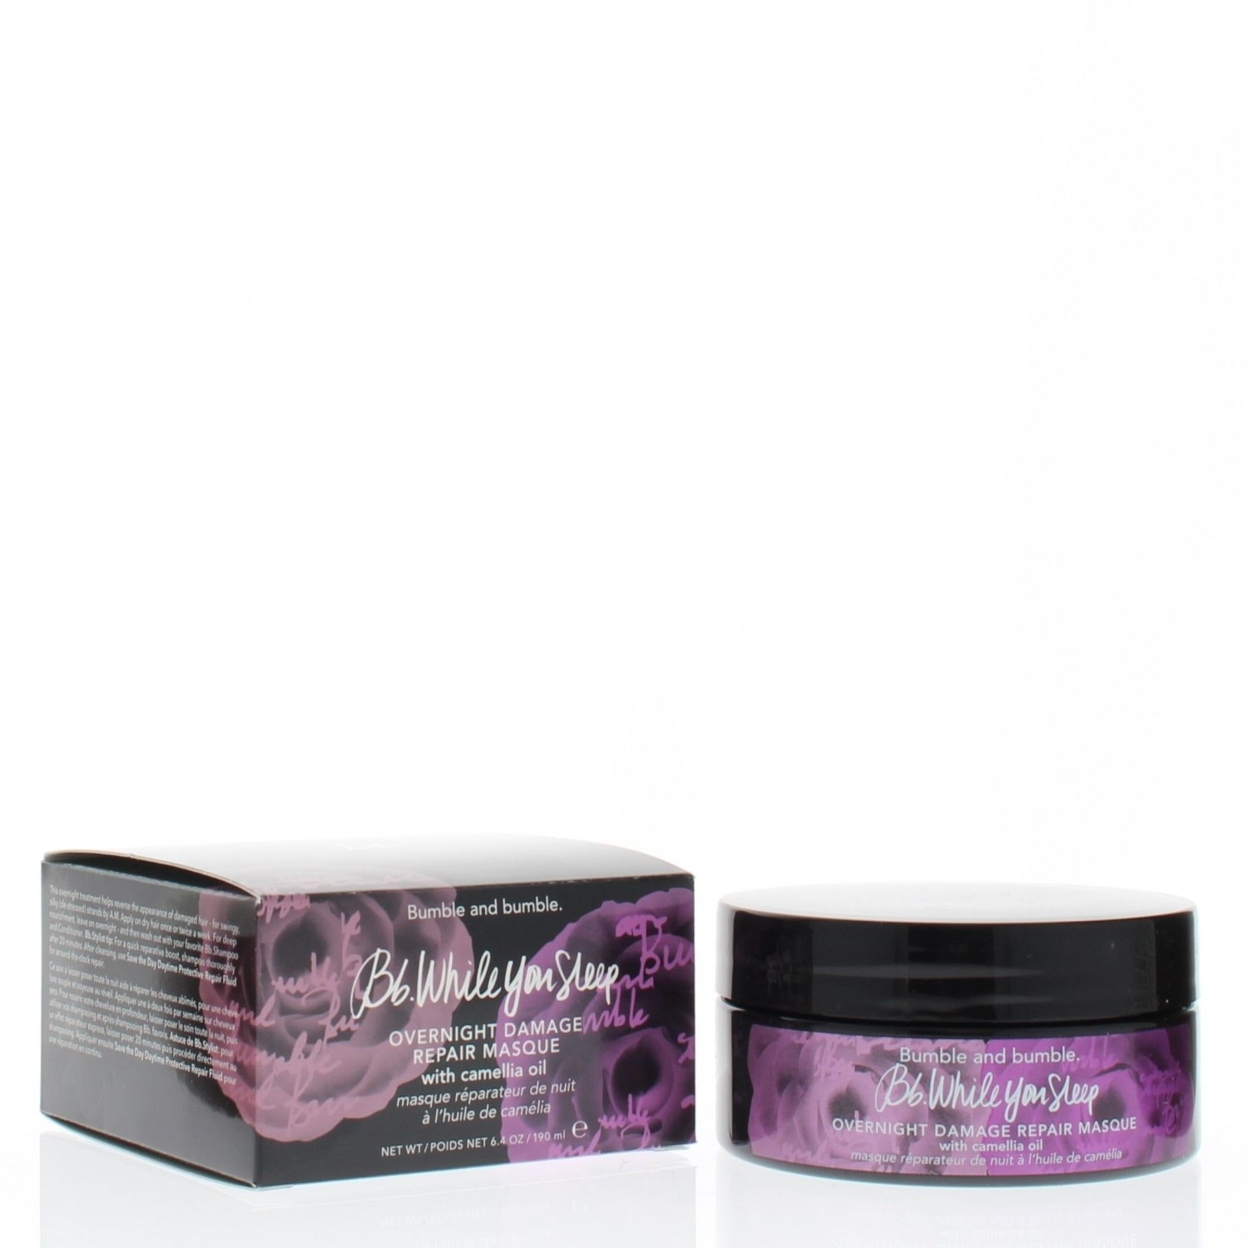 Bumble And Bumble Bb. While You Sleep Overnight Damage Repair Masque 6.4oz/190ml